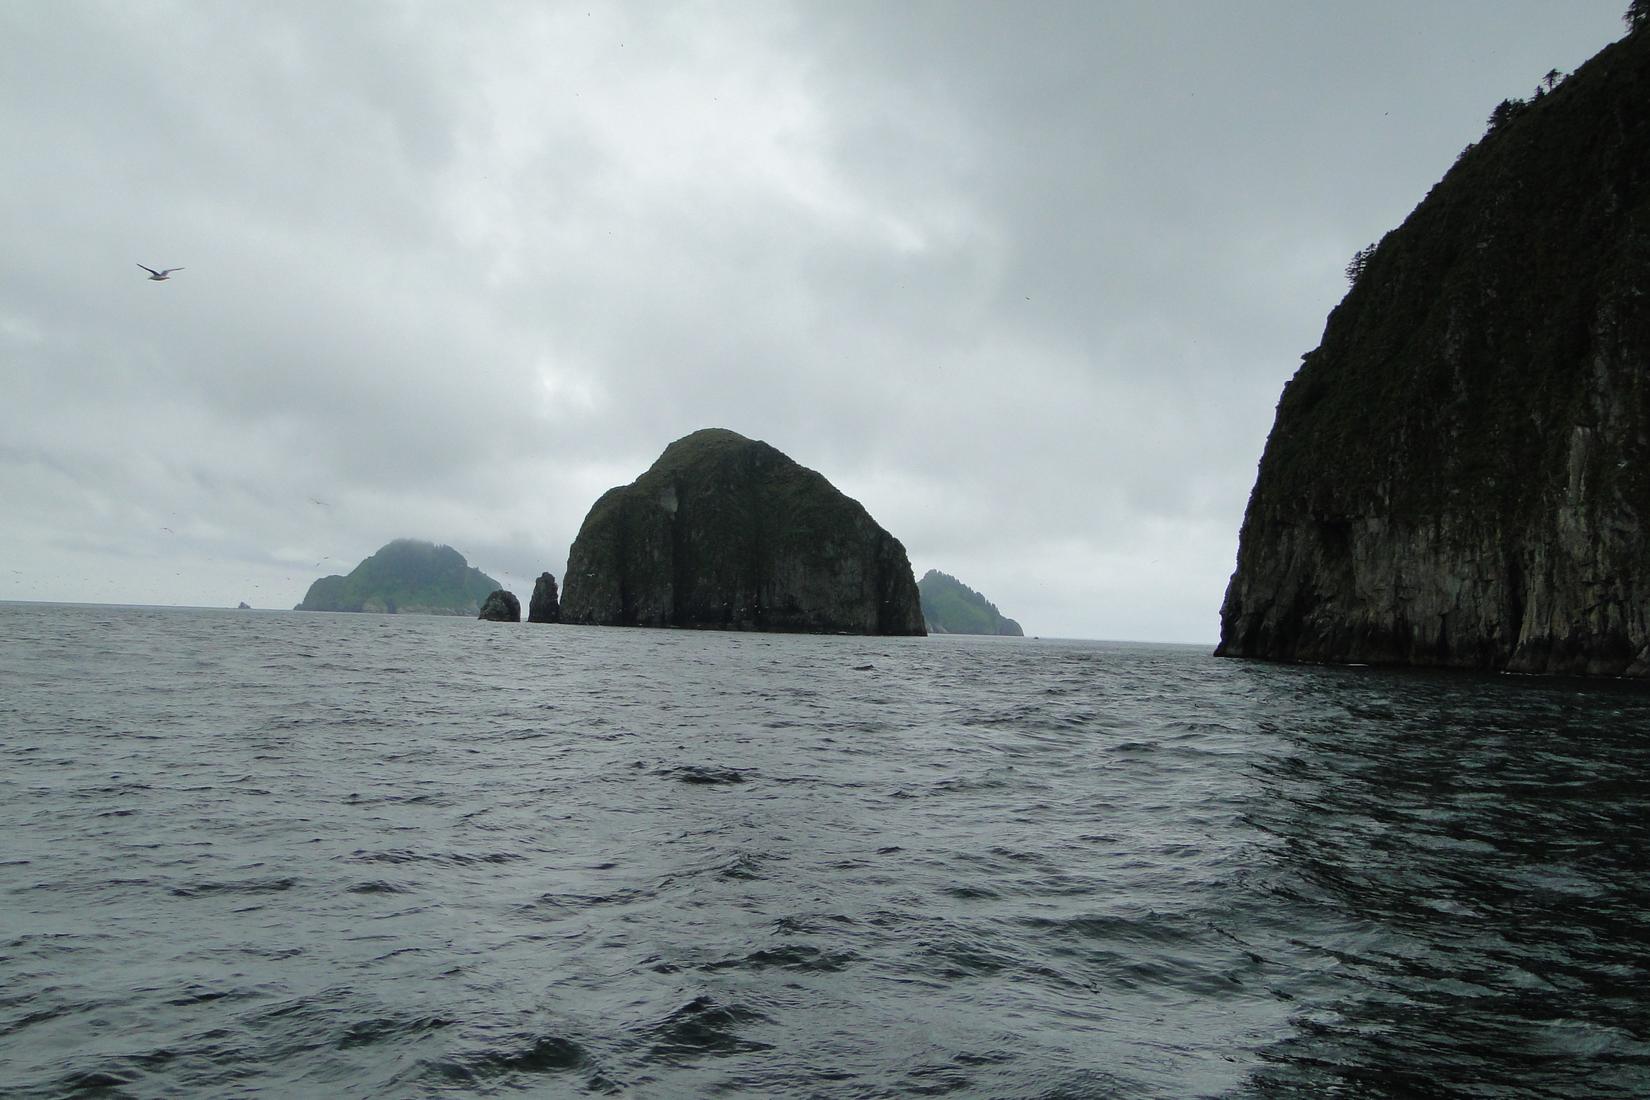 Sandee - Chiswell Islands